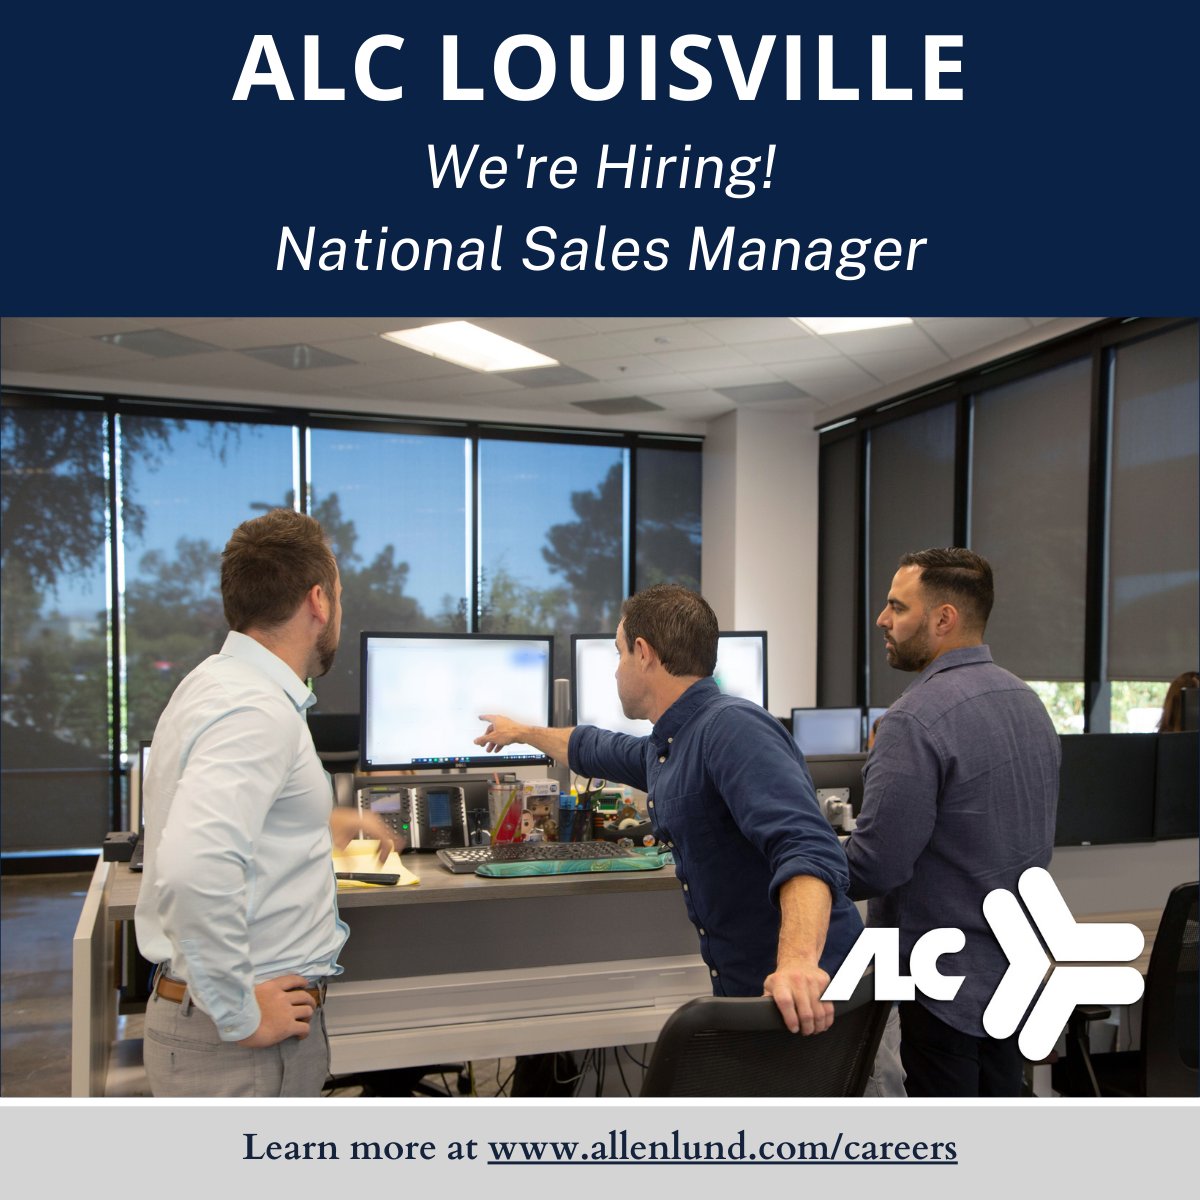 ALC Louisville is hiring! 

To learn more/apply click here: 
bit.ly/3Er1nTk

#AllenLund #Hiring #3PL #sales #nationalsalesmanager #bds #transportationindustry #louisvillejobs #freight #familyowned